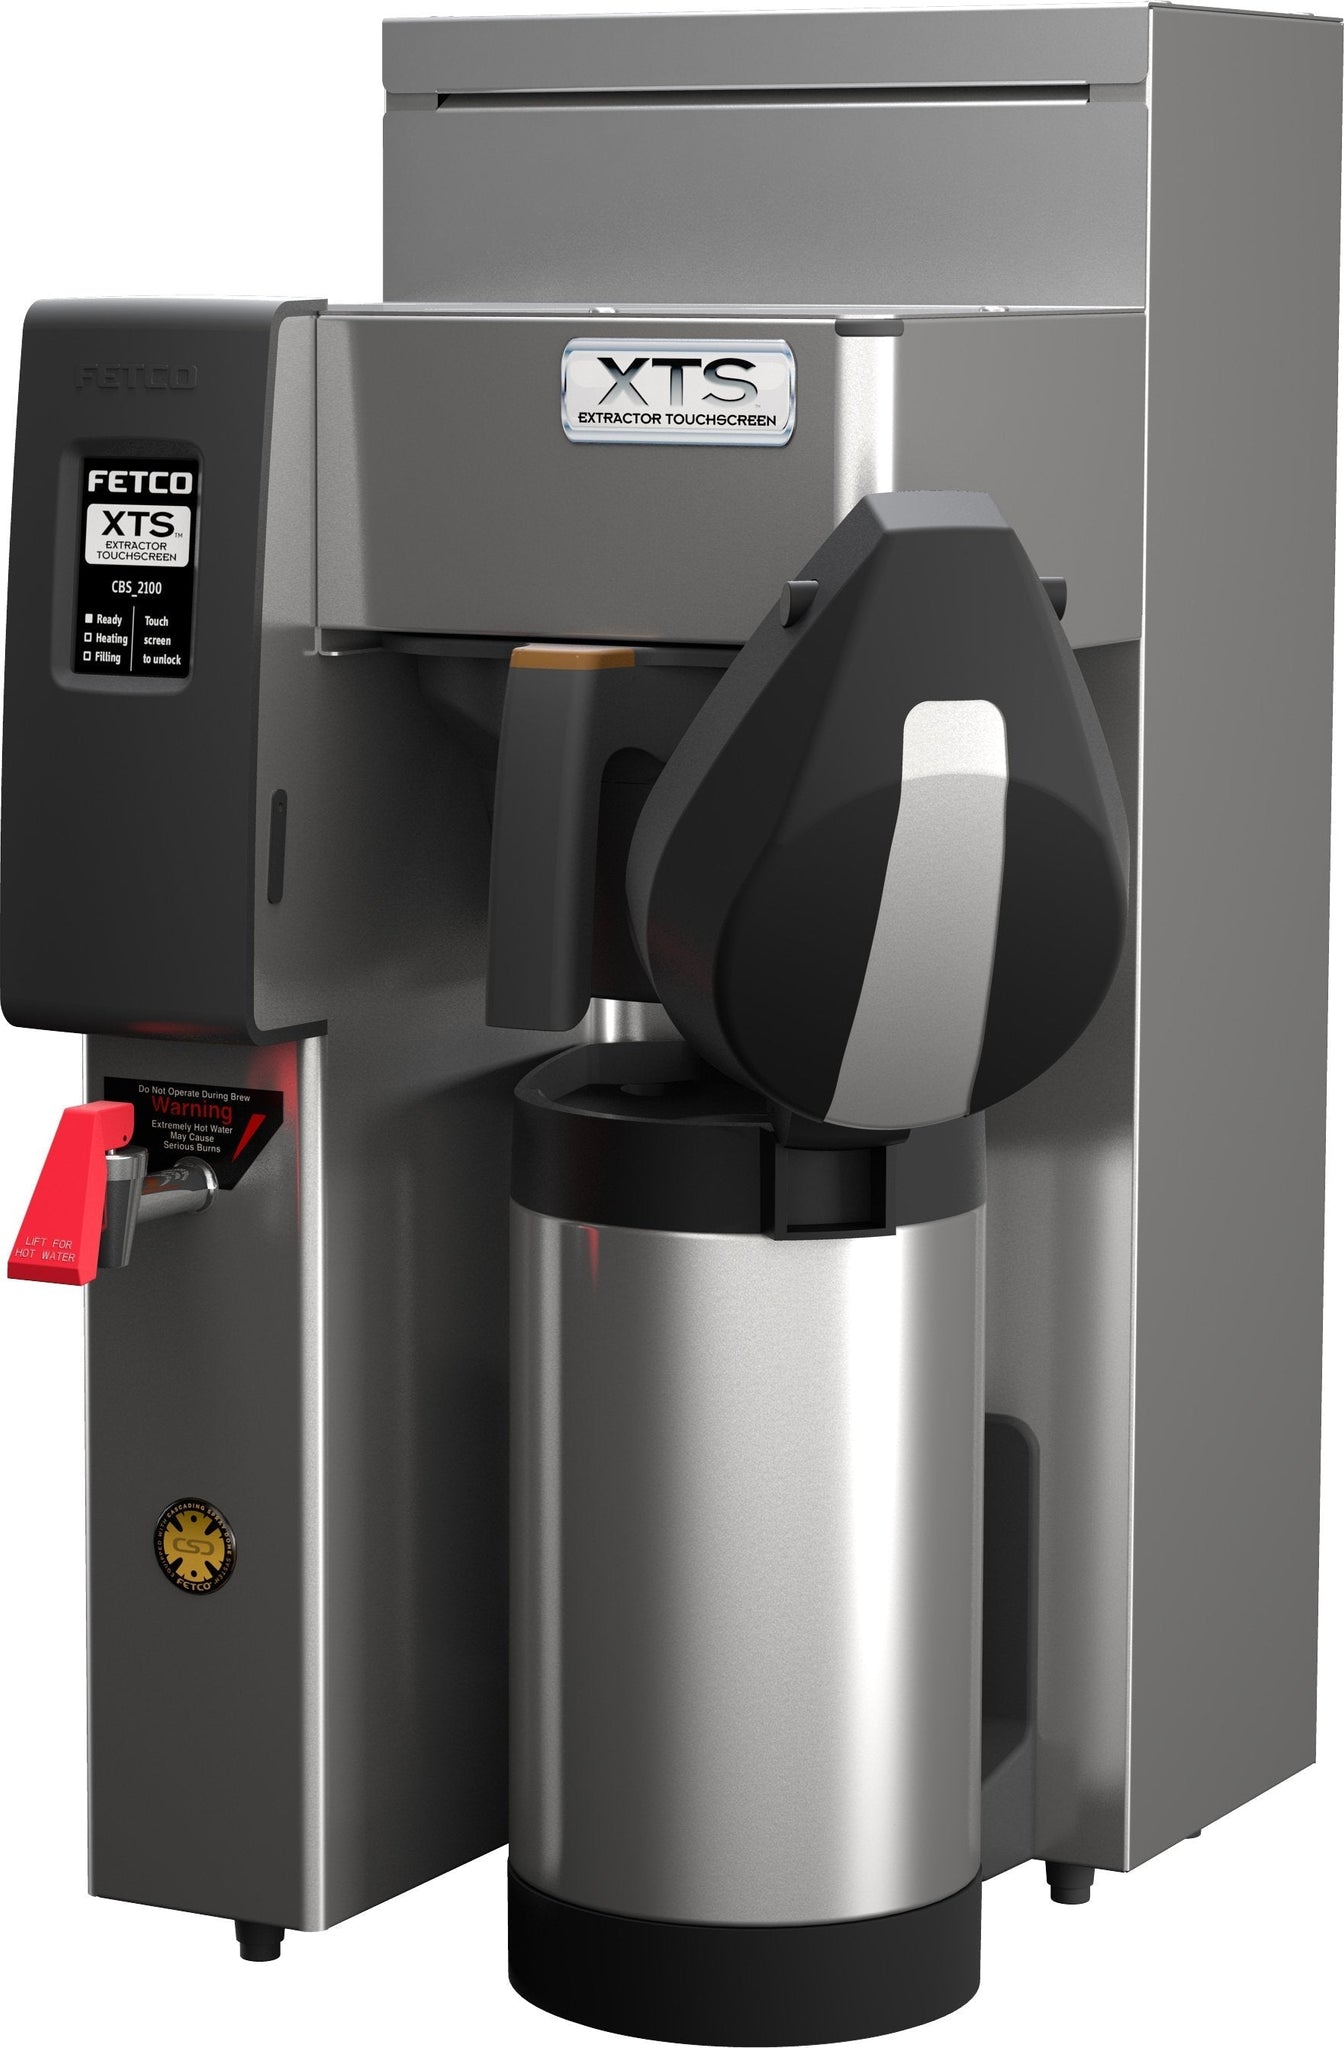 Fetco - Touchscreen Series Airpot Coffee Brewer Single Station 1 x 2.3 kW with Metal Brew Basket - CBS-2131XTS